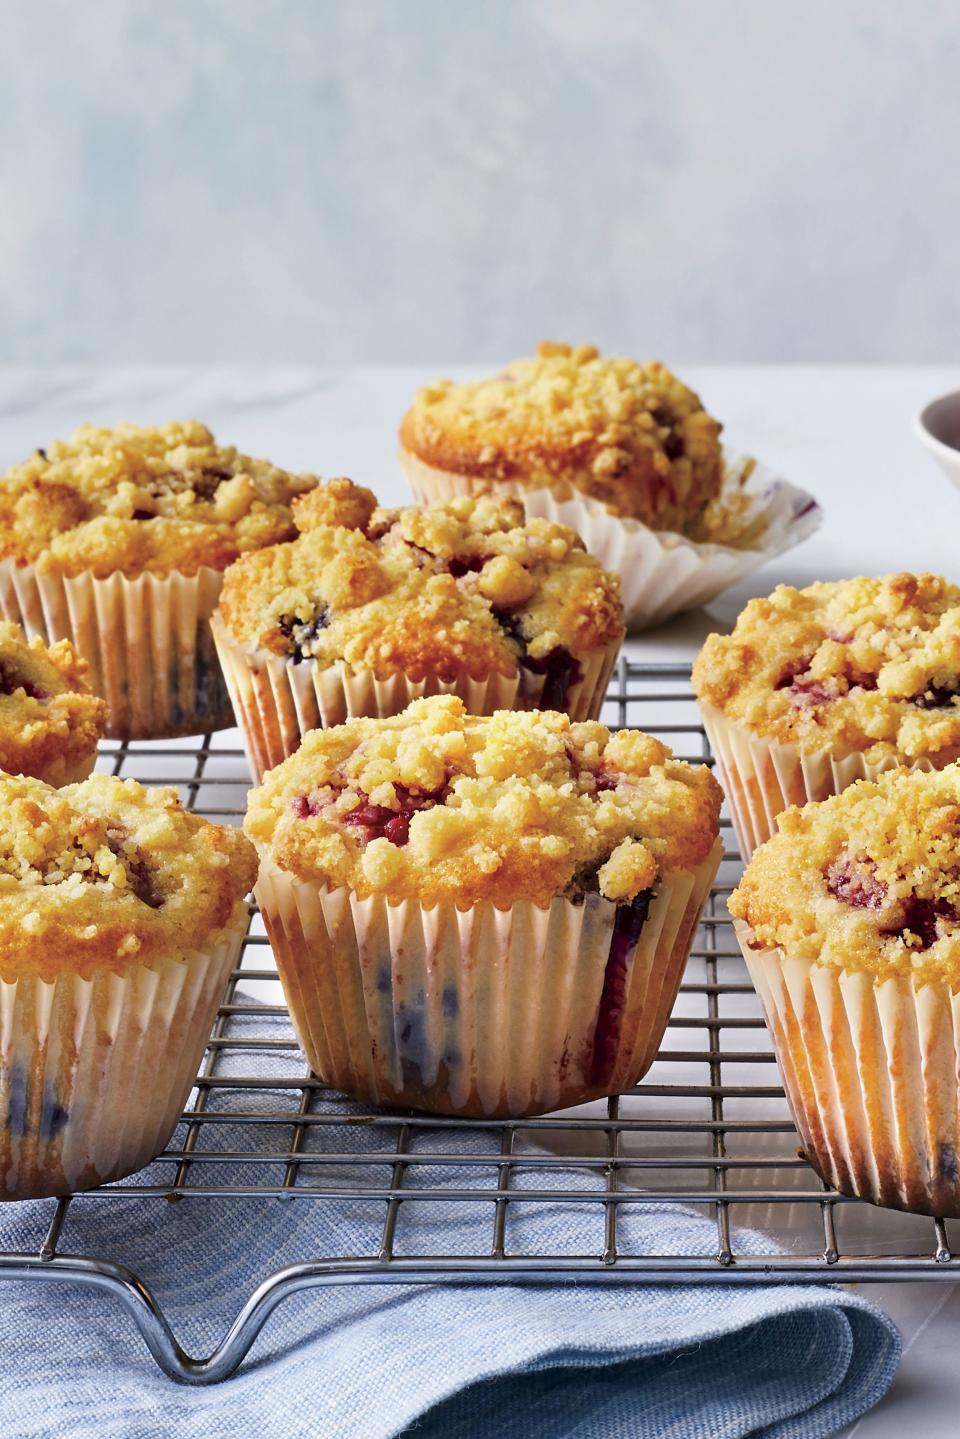 Any-Berry Muffins with Cornmeal Streusel